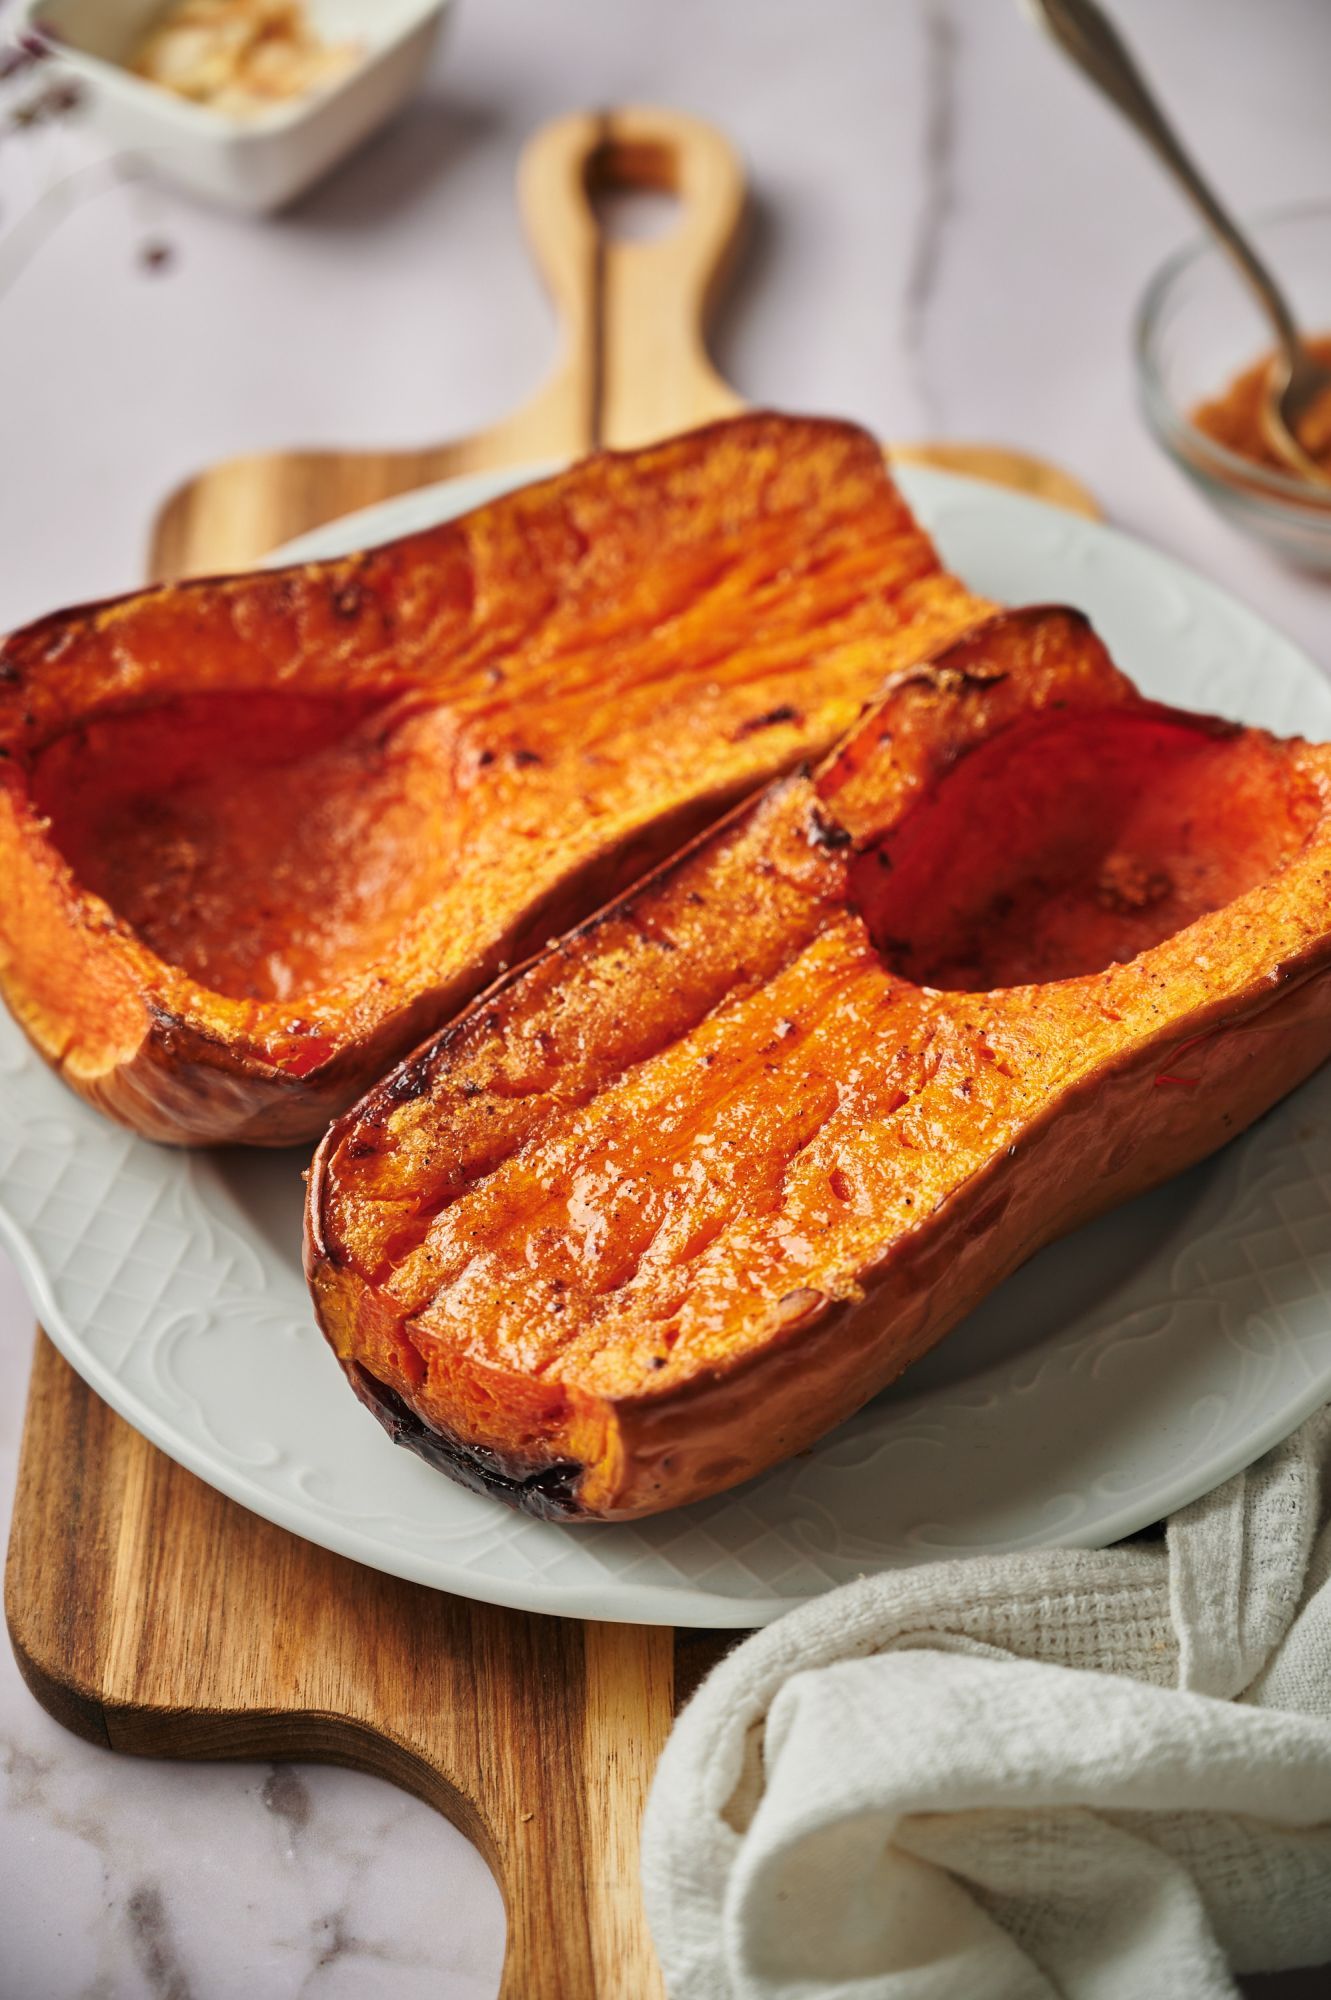 Roasted whole butternut squash drizzled with olive oil, brown sugar, salt, and pepper on a serving plate.